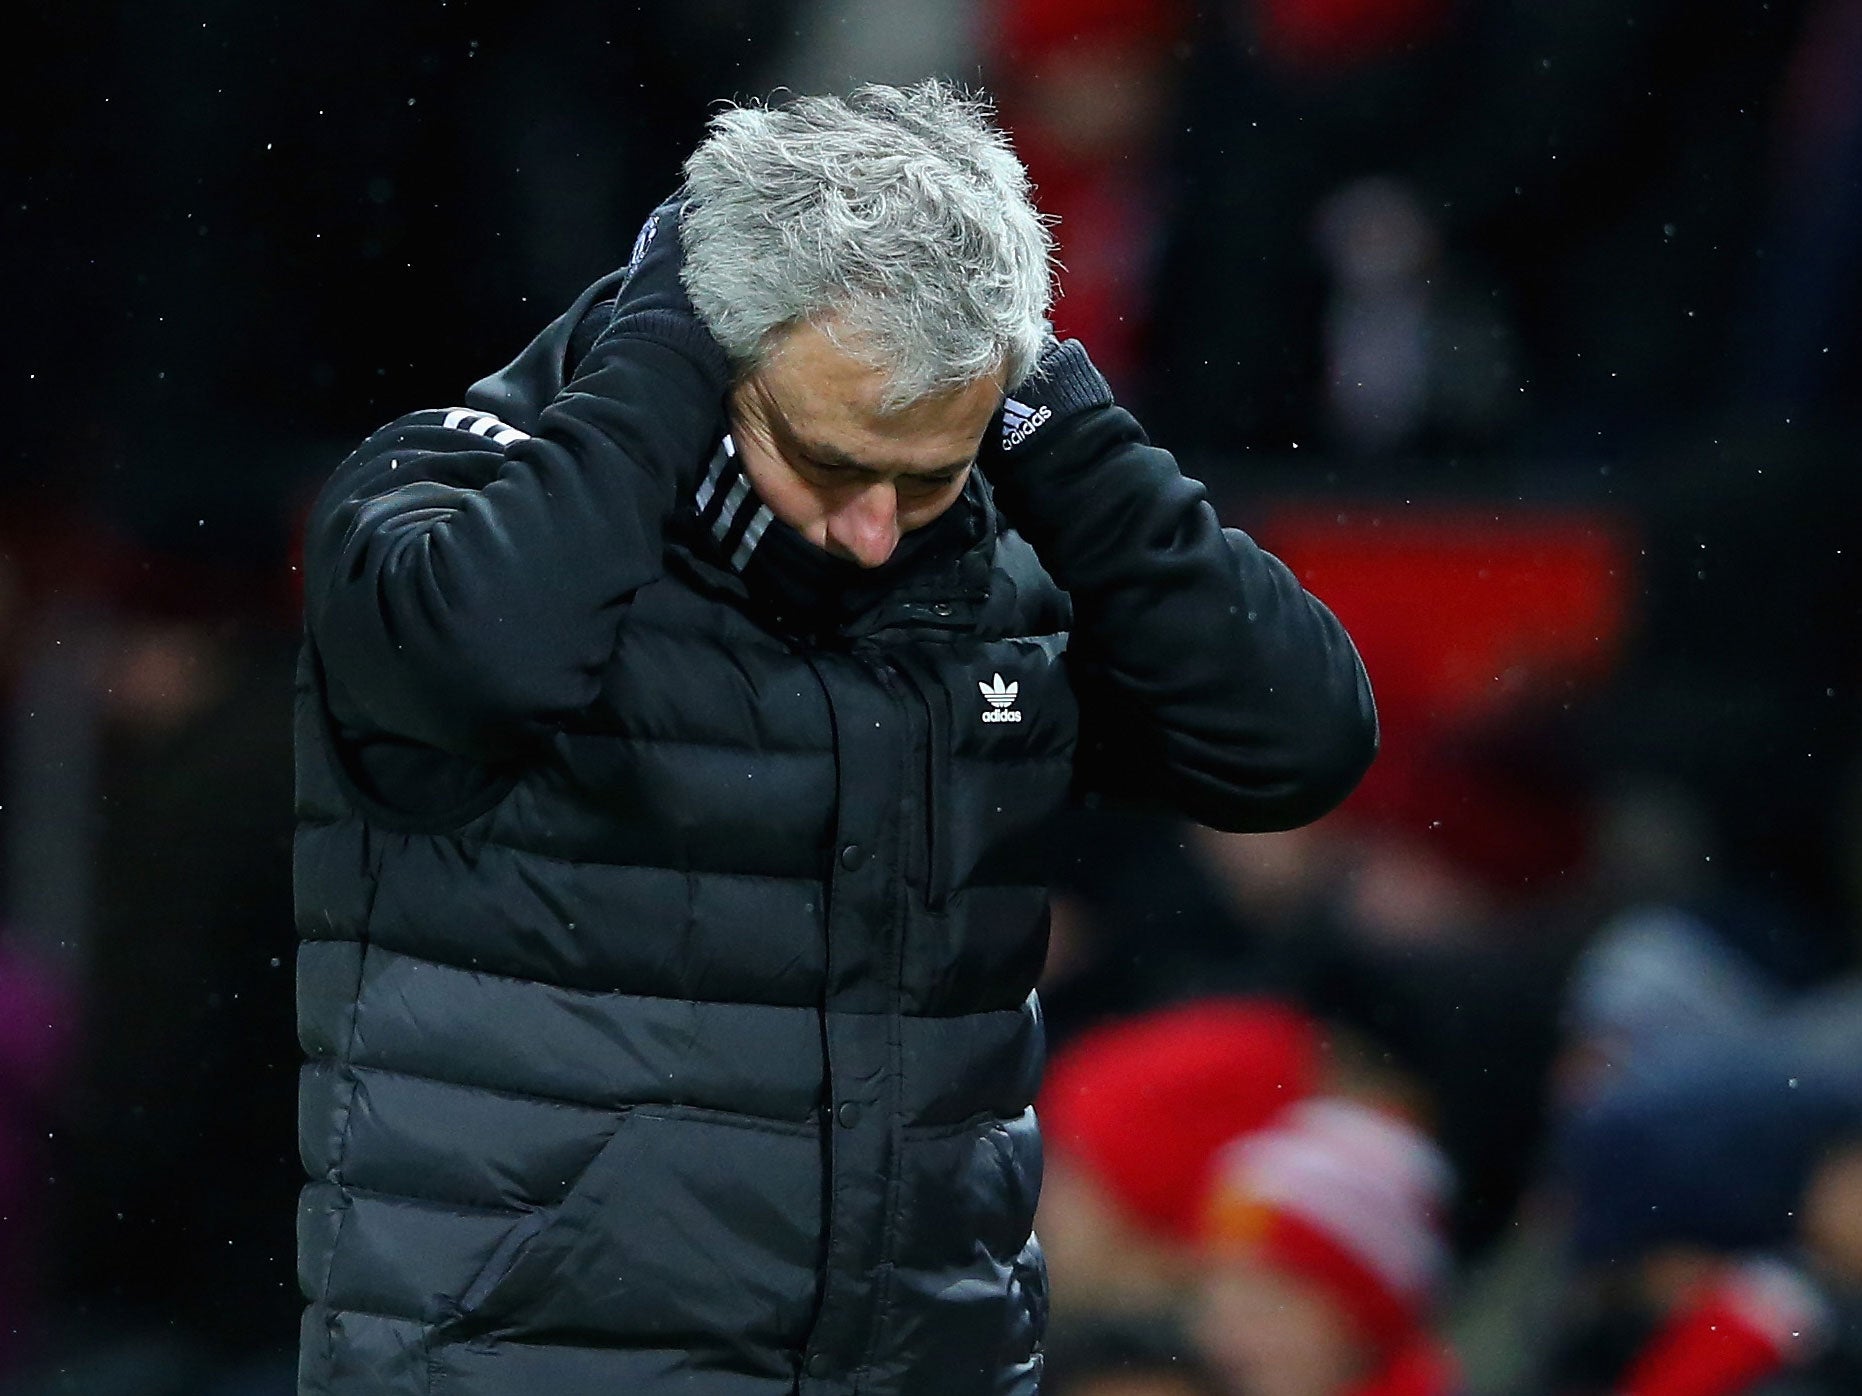 Jose Mourinho was not happy with what he saw from his players